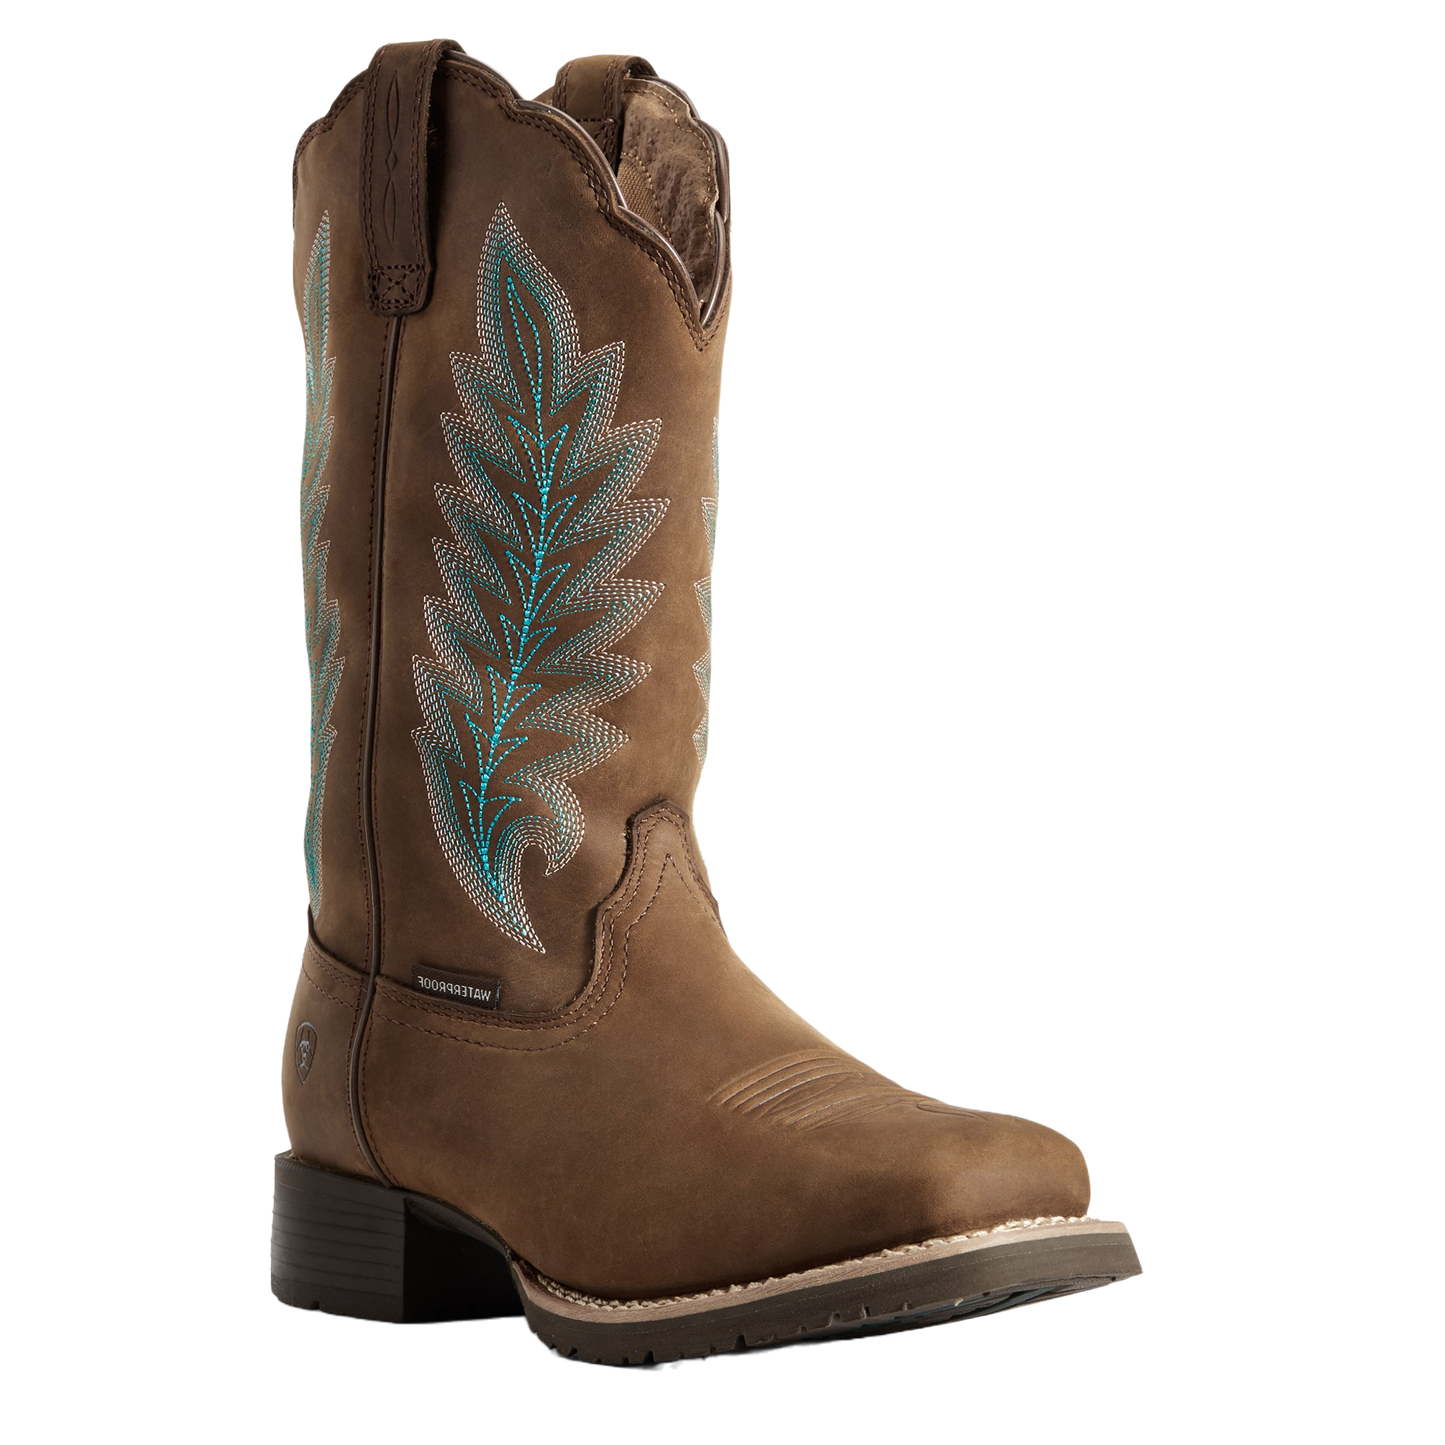 Ariat Ladies Hybrid Rancher Waterproof 400g Leather Boots 10029728